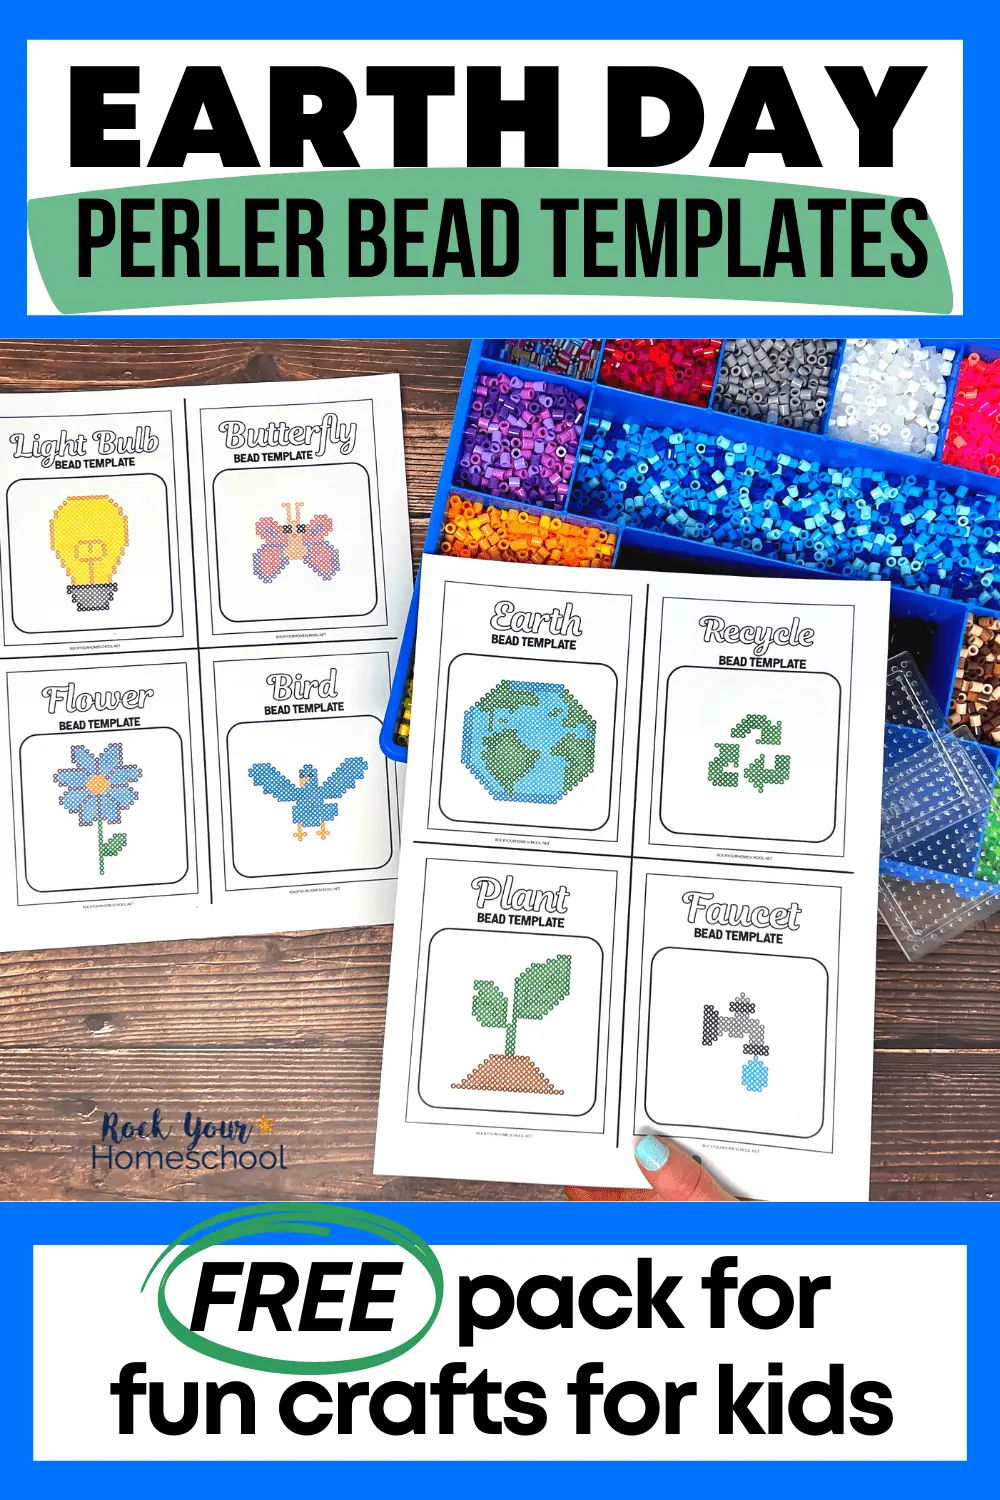 Earth Day Perler Beads: Templates + How to Make These Fun Crafts (8 Free)